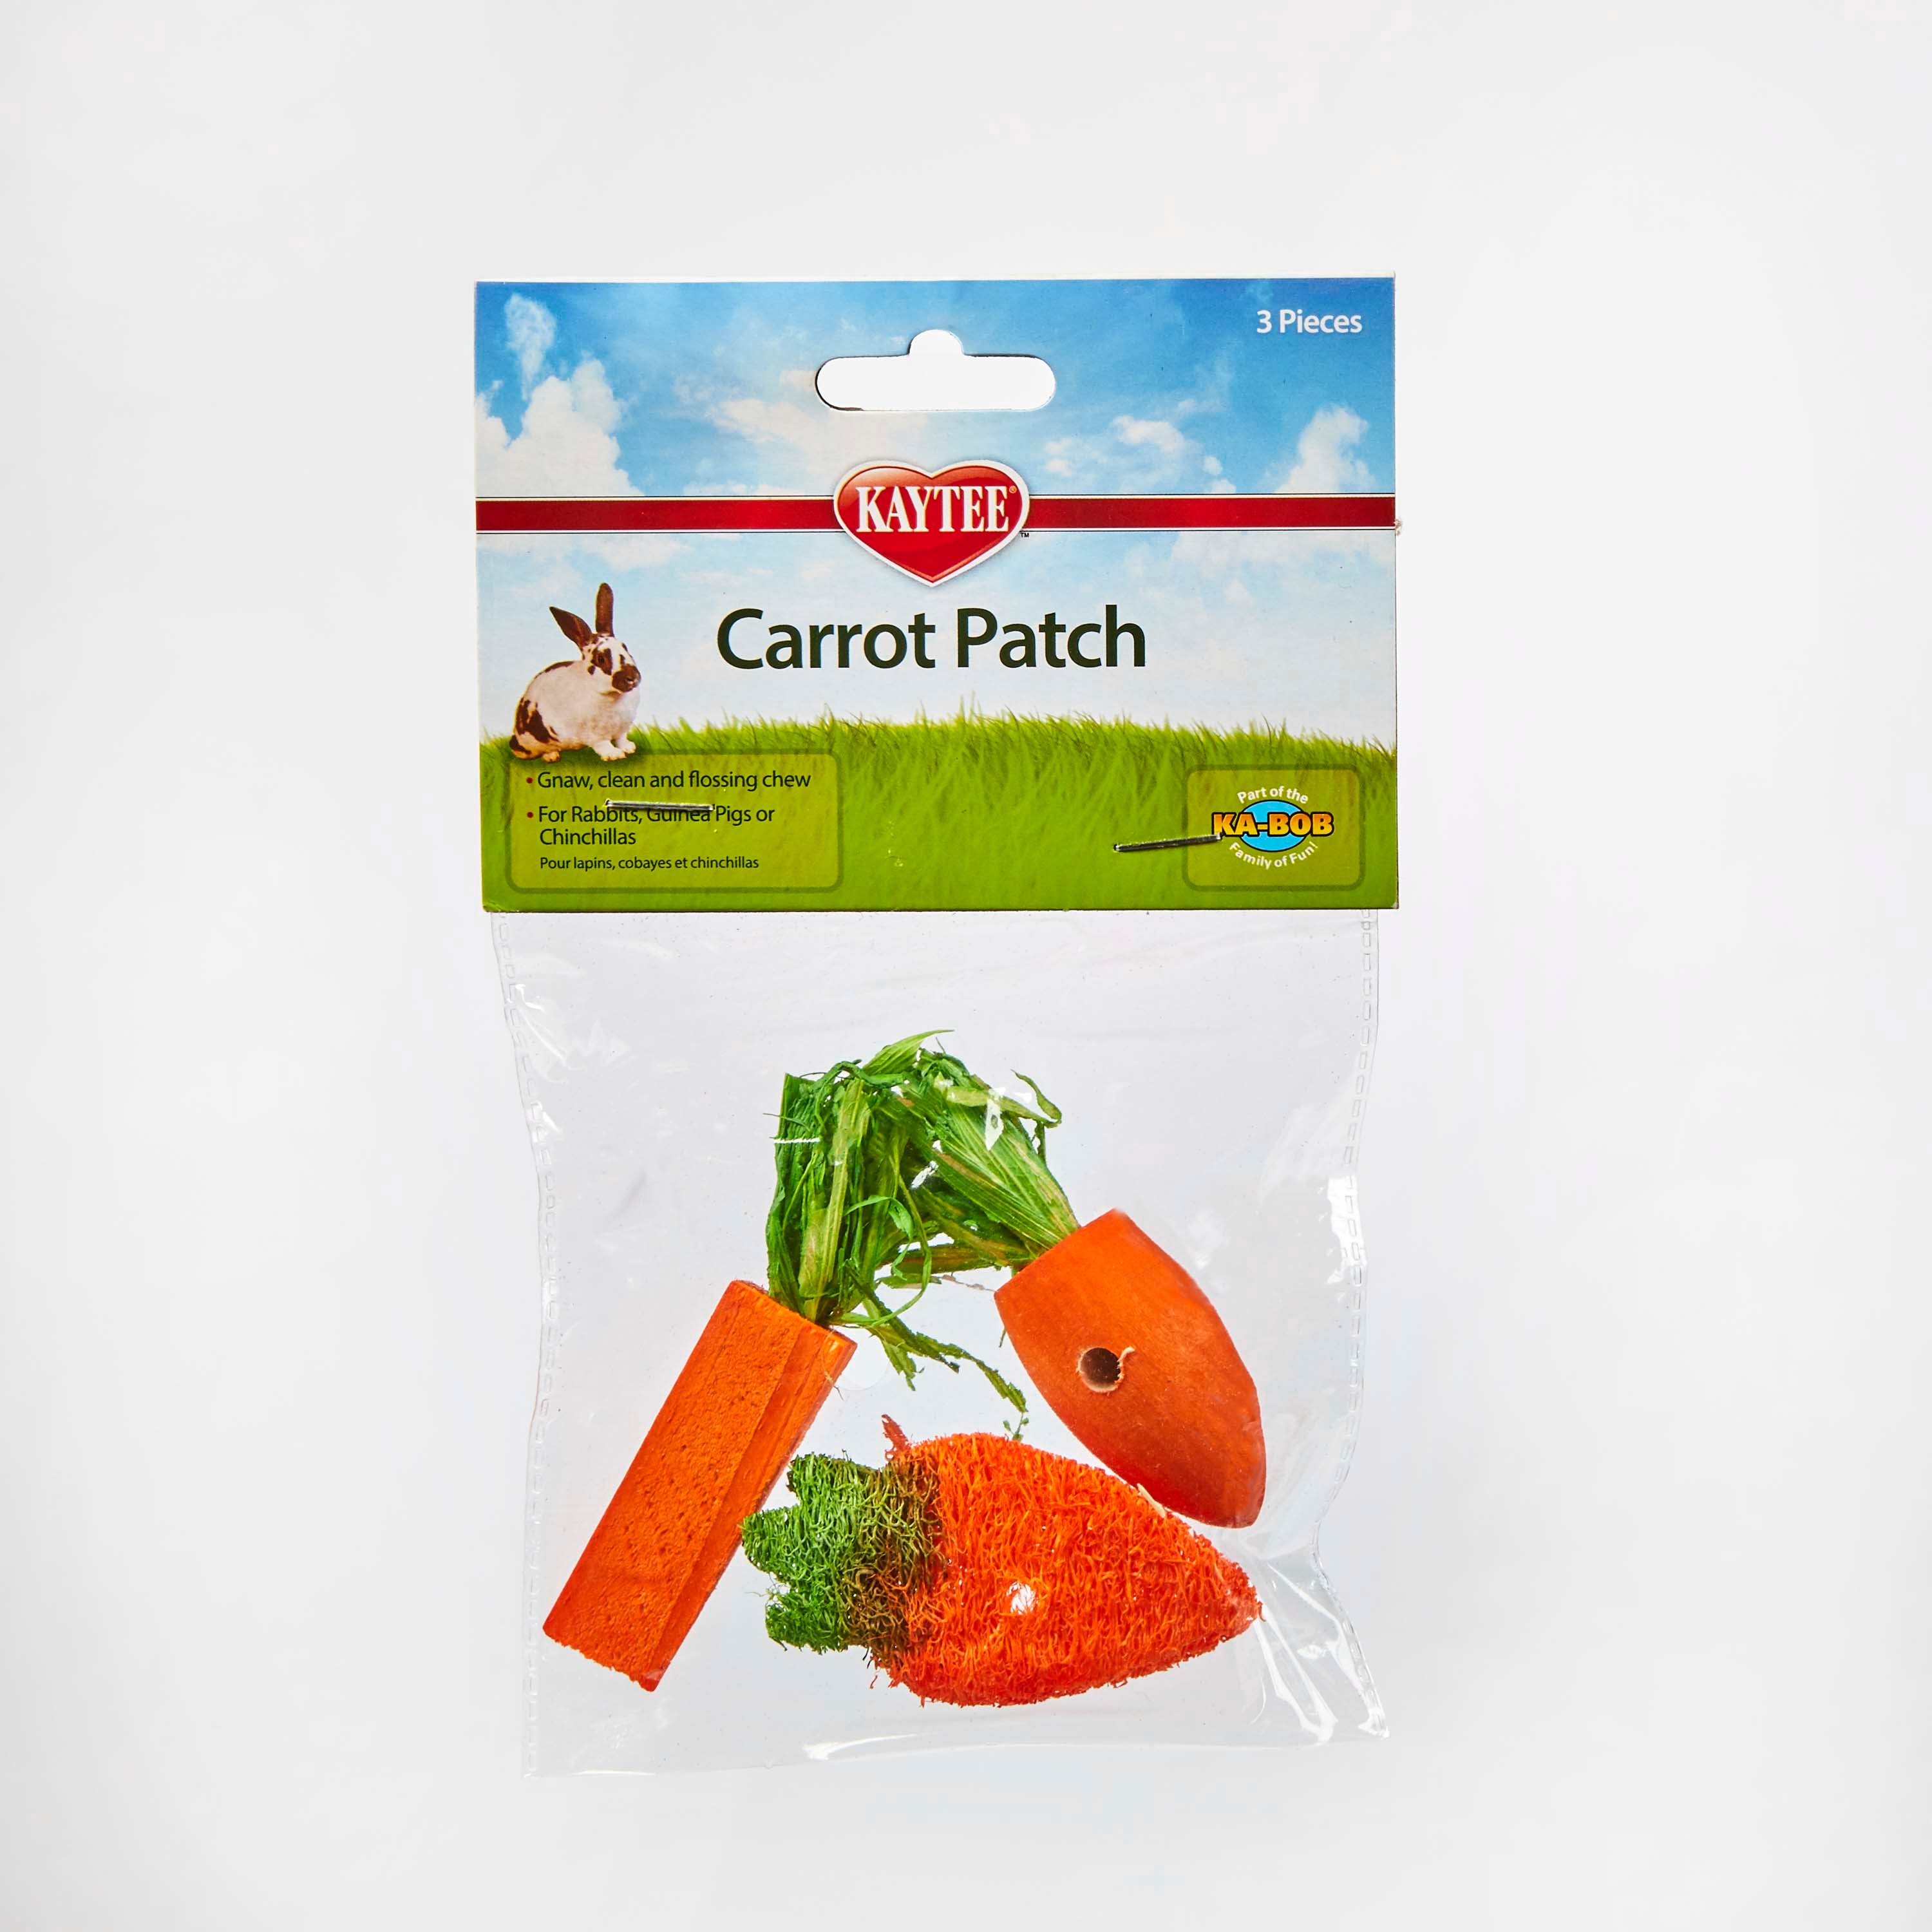 Kaytee Carrot Patch Chew Toy 3 Pack